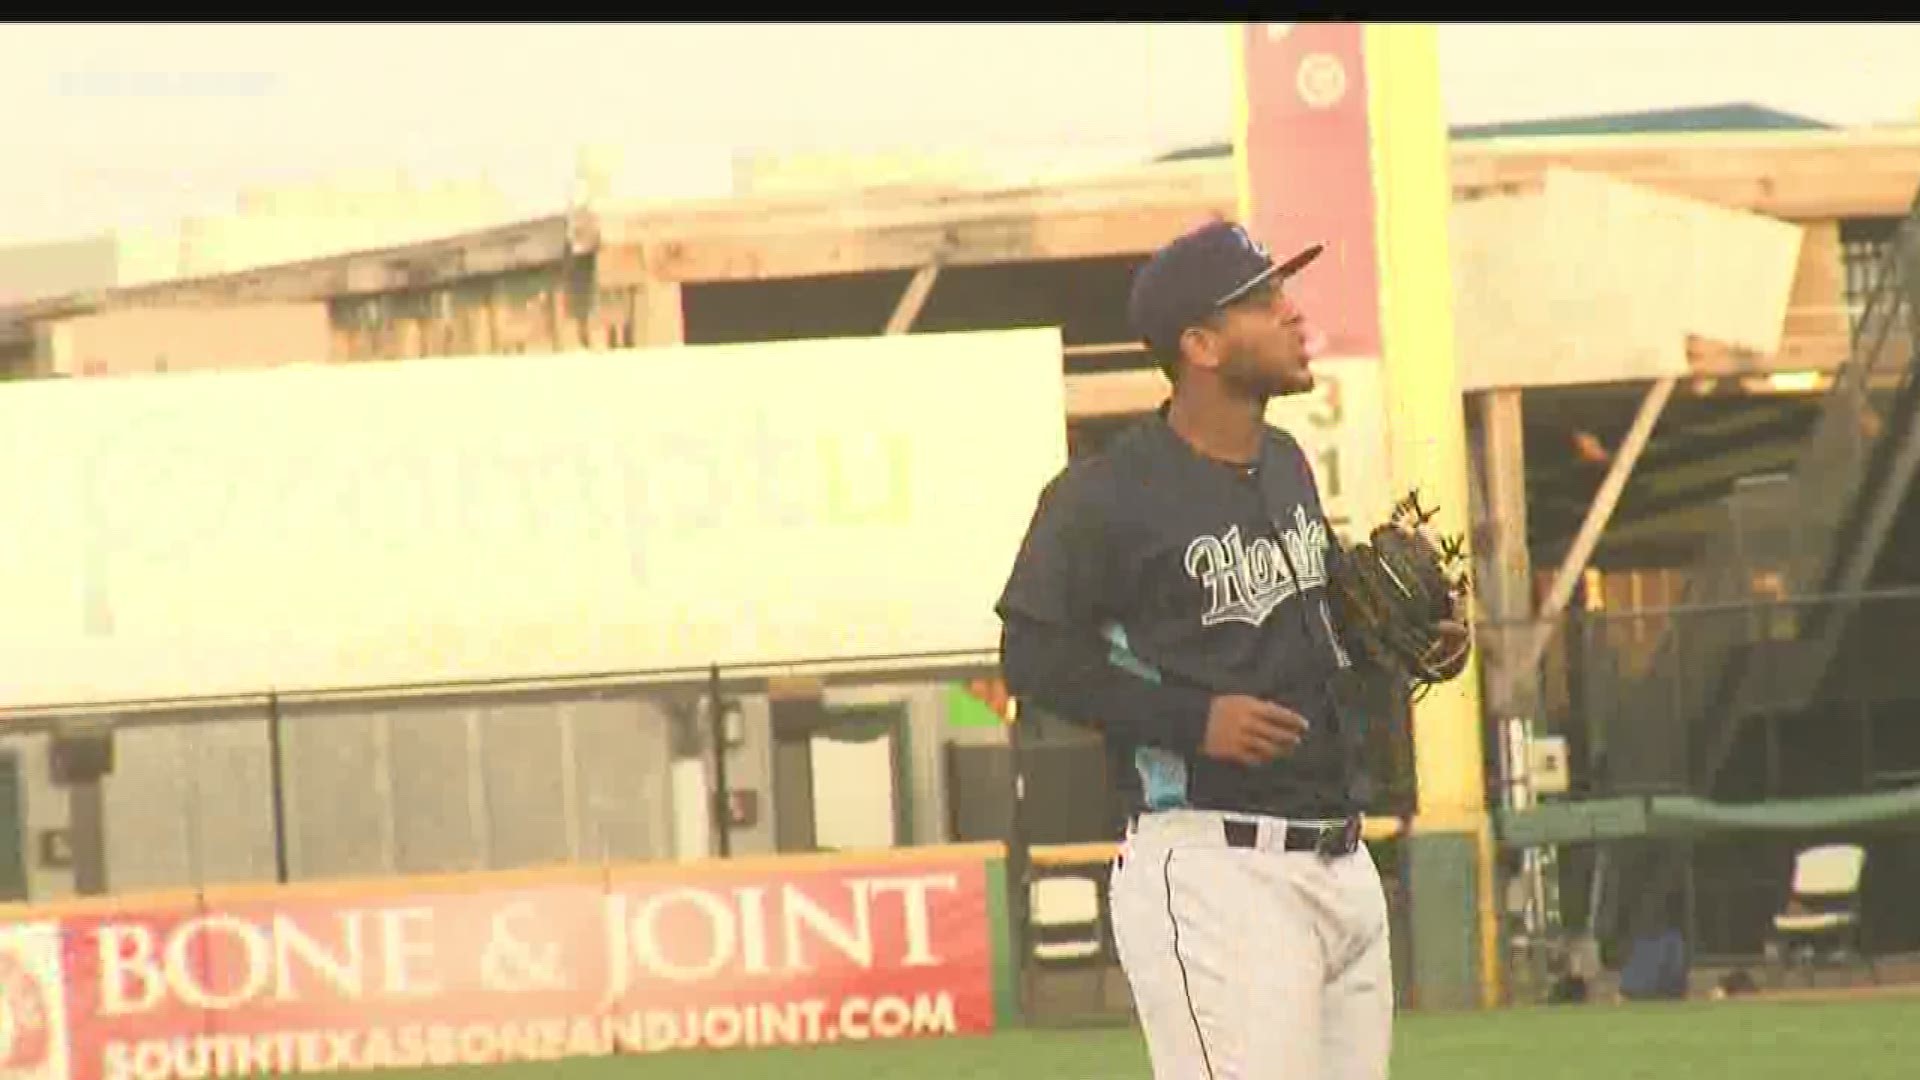 Corpus Christi used a 7th inning rally to knock off Northwest Arkansas 5-2 Thursday night at Whataburger Field.